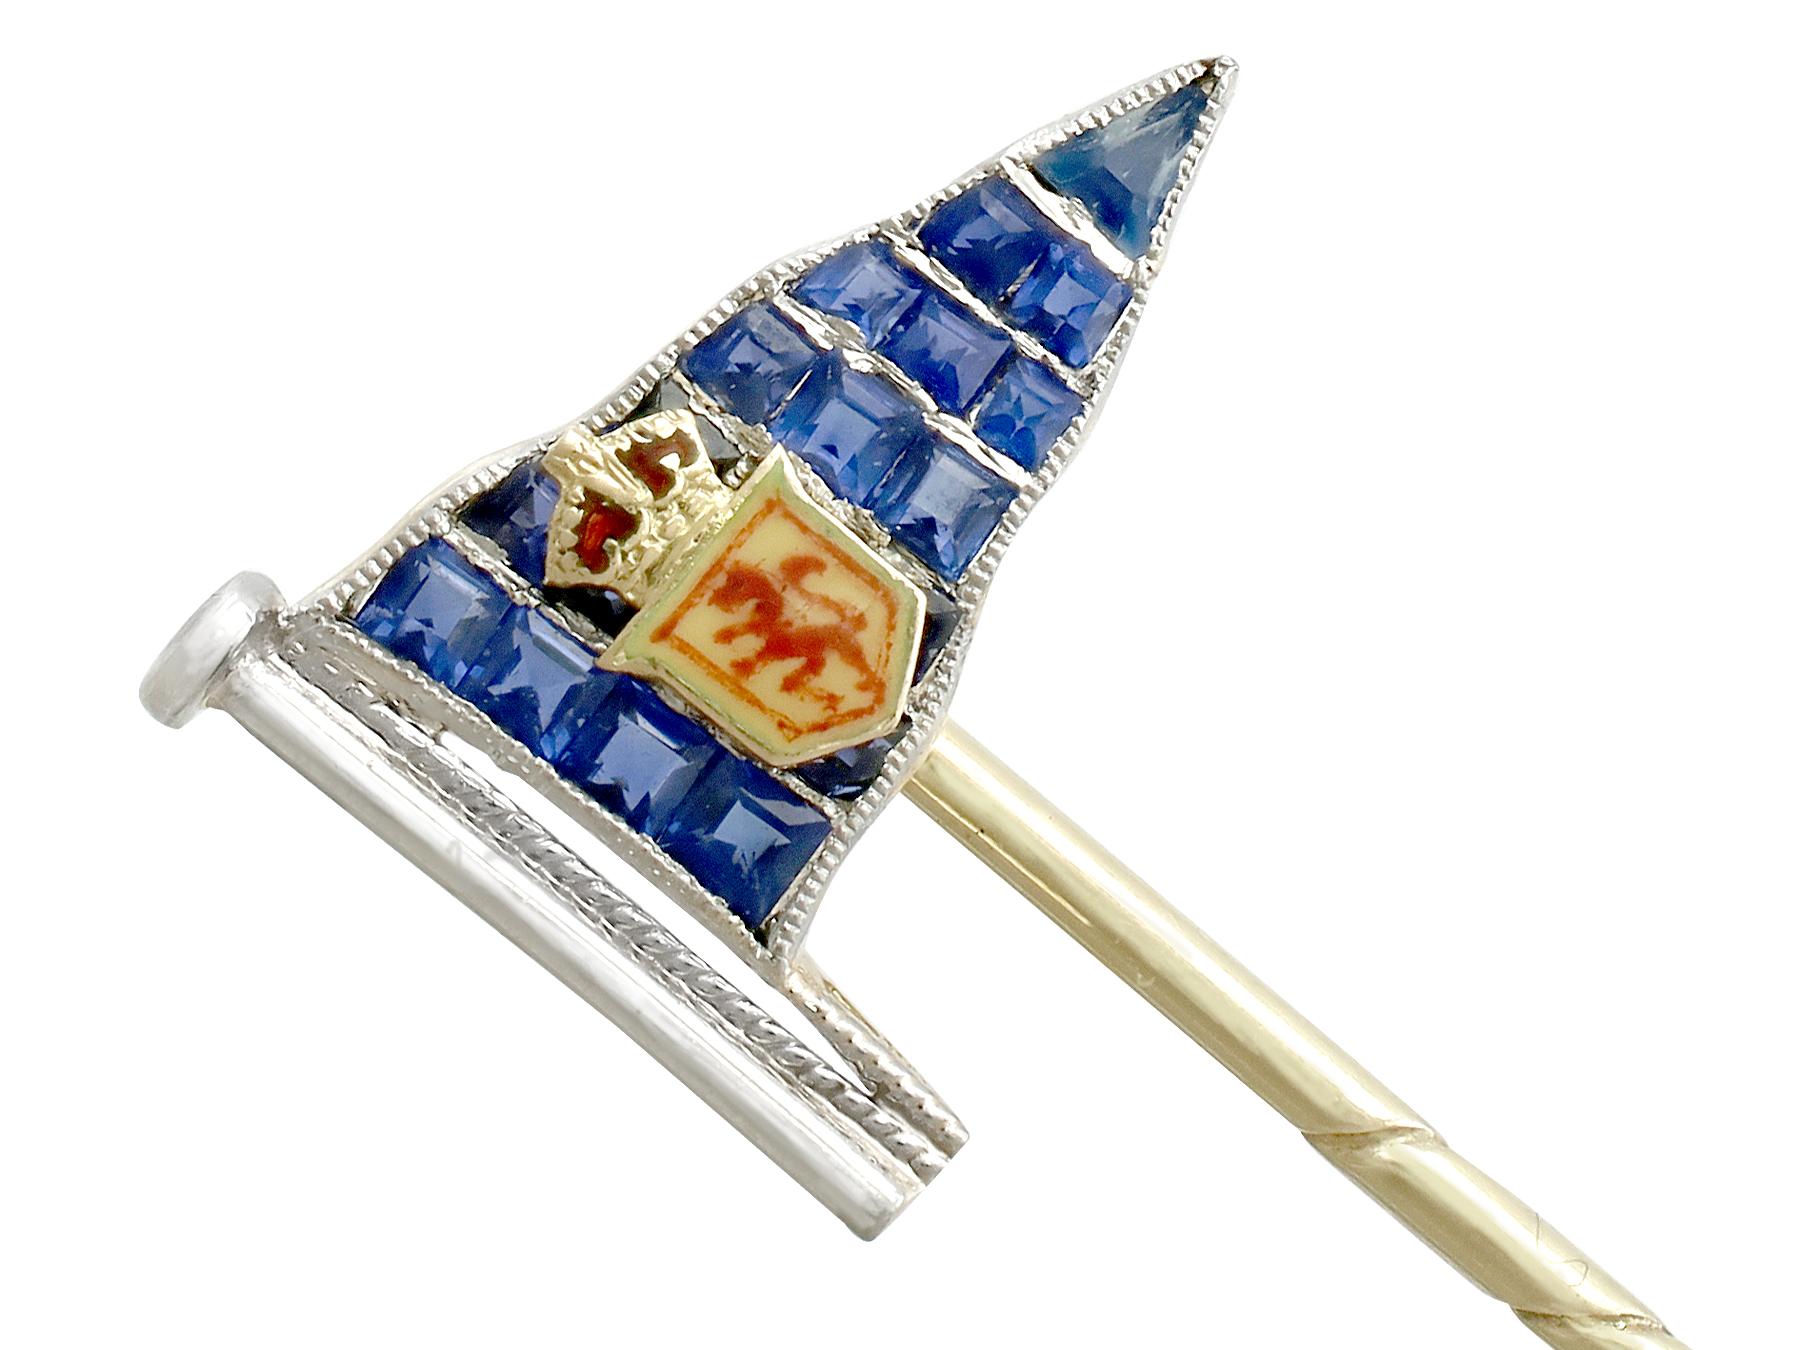 Antique Sapphire and Enamel Royal Clyde Yacht Club Pin Brooch 1